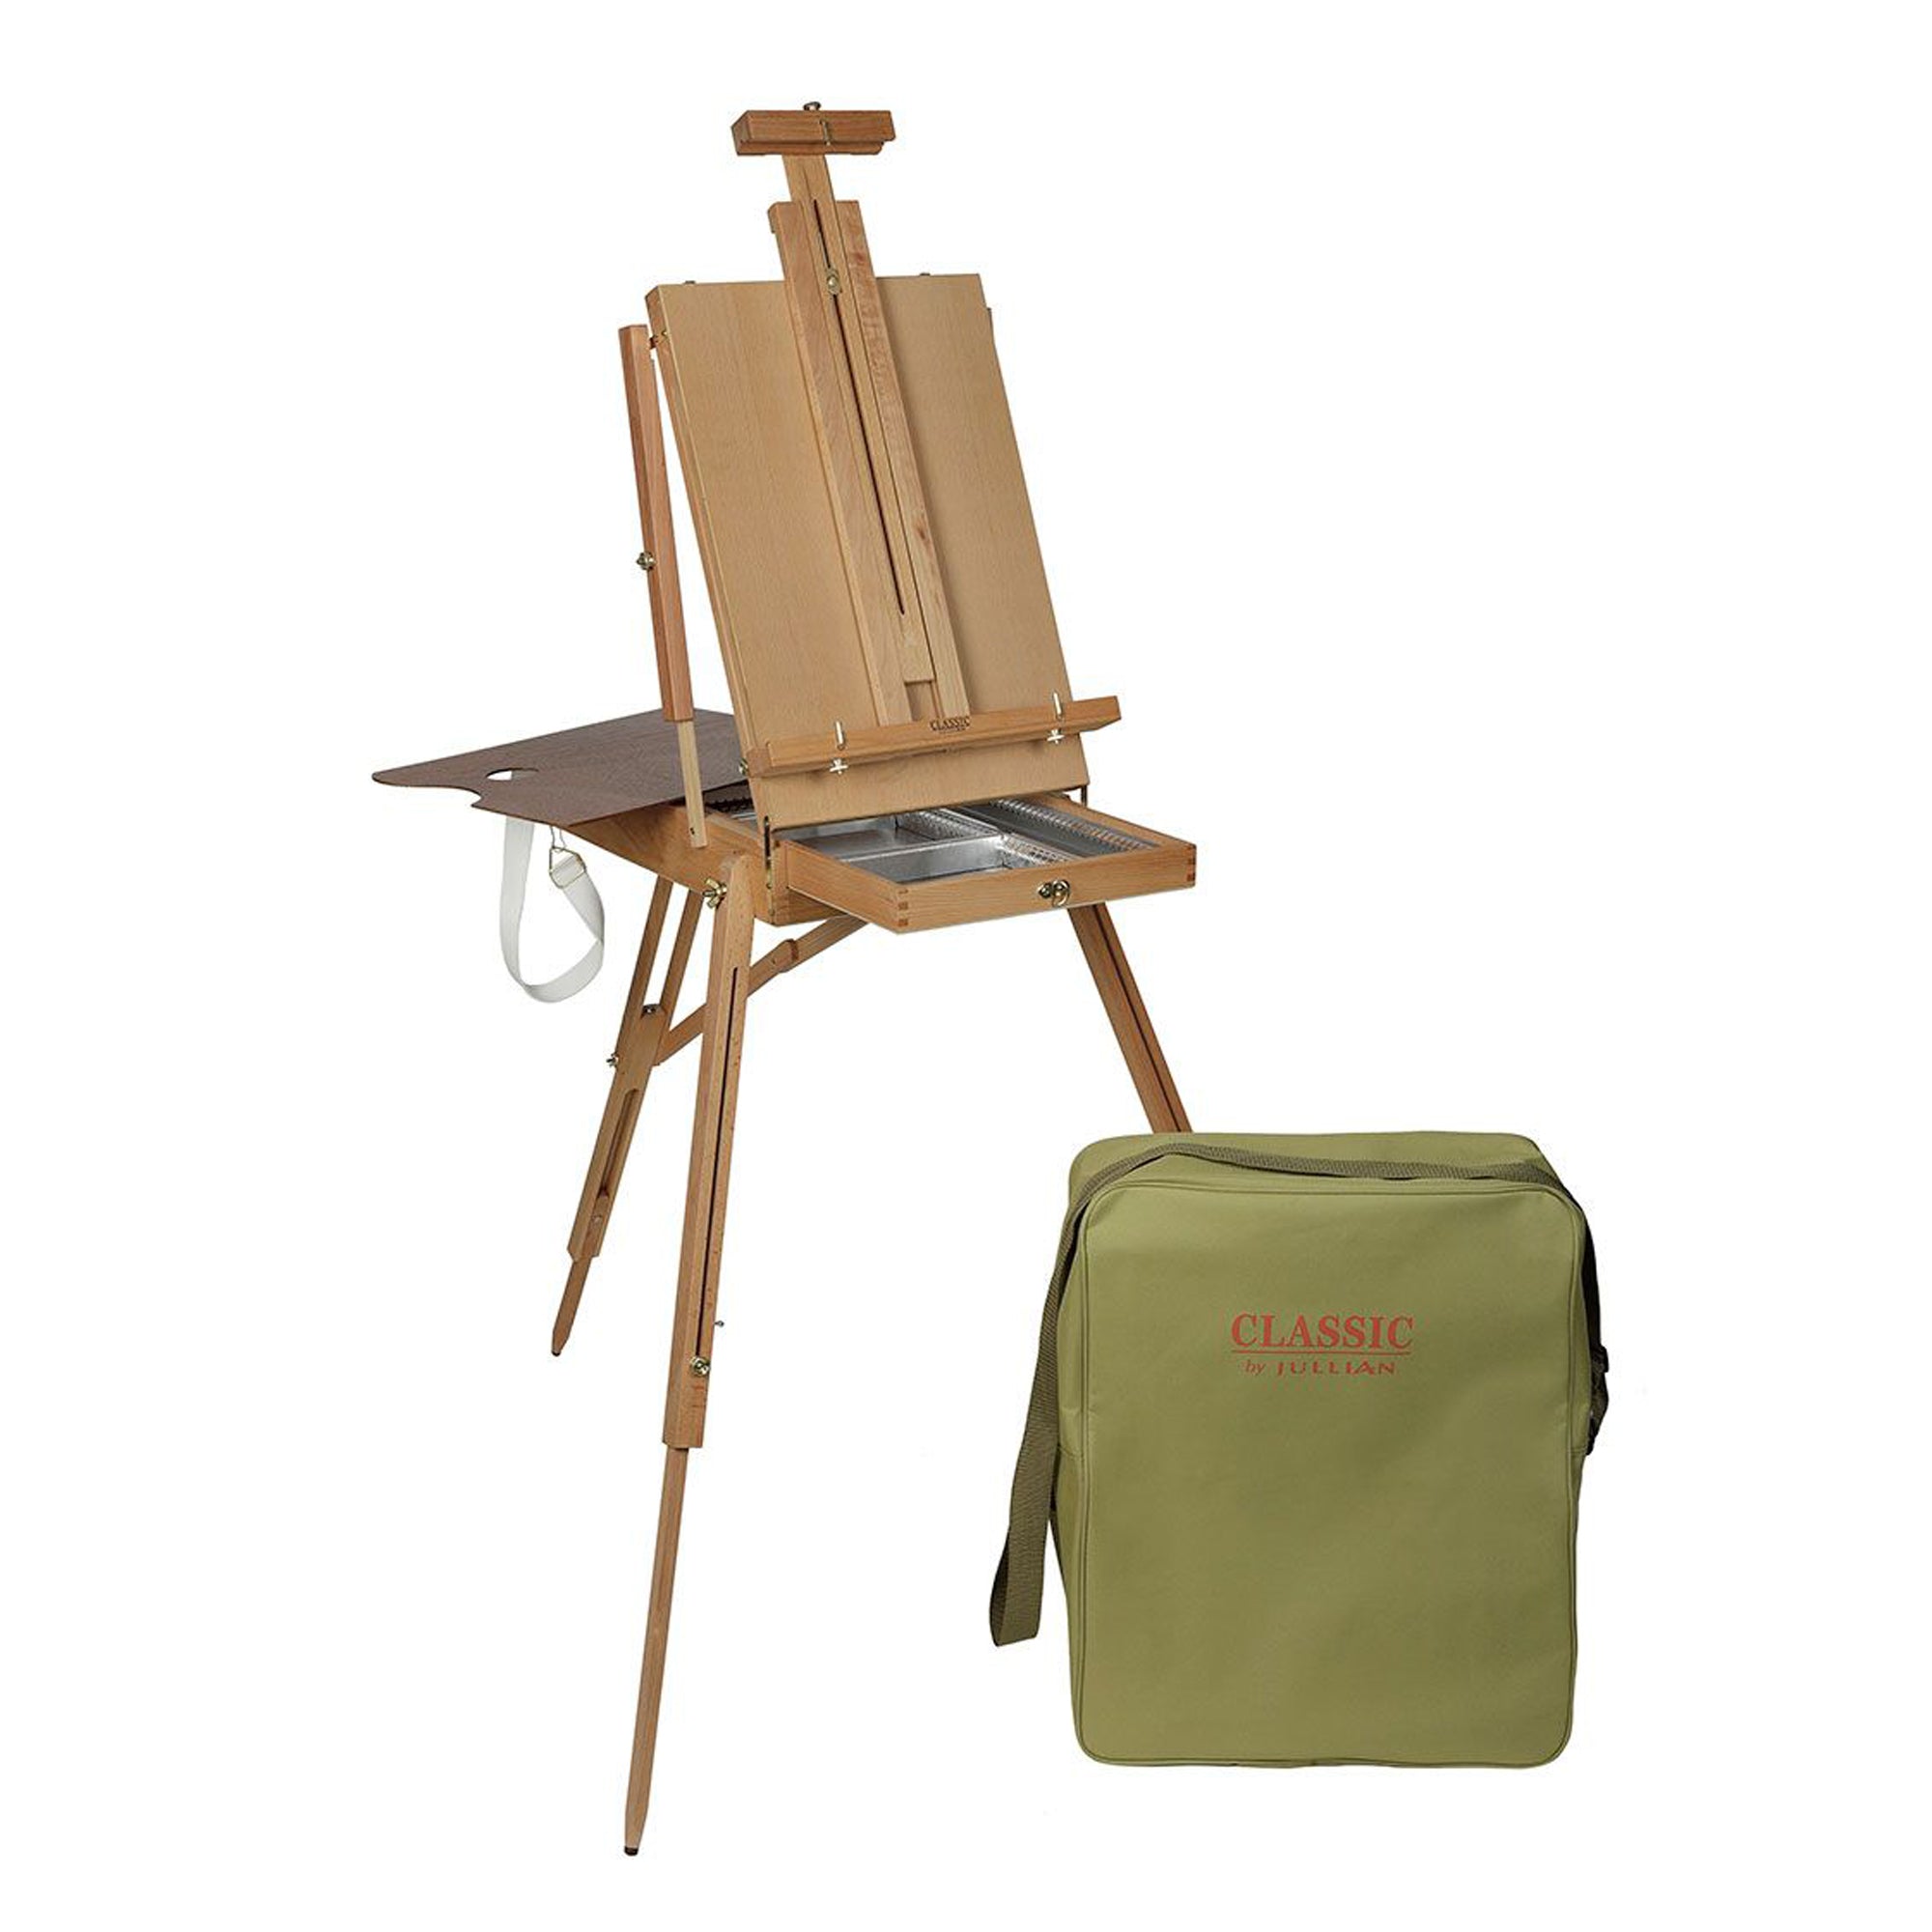 Jullian Classic Full Size Sketch Box Easel with Carrying Bag